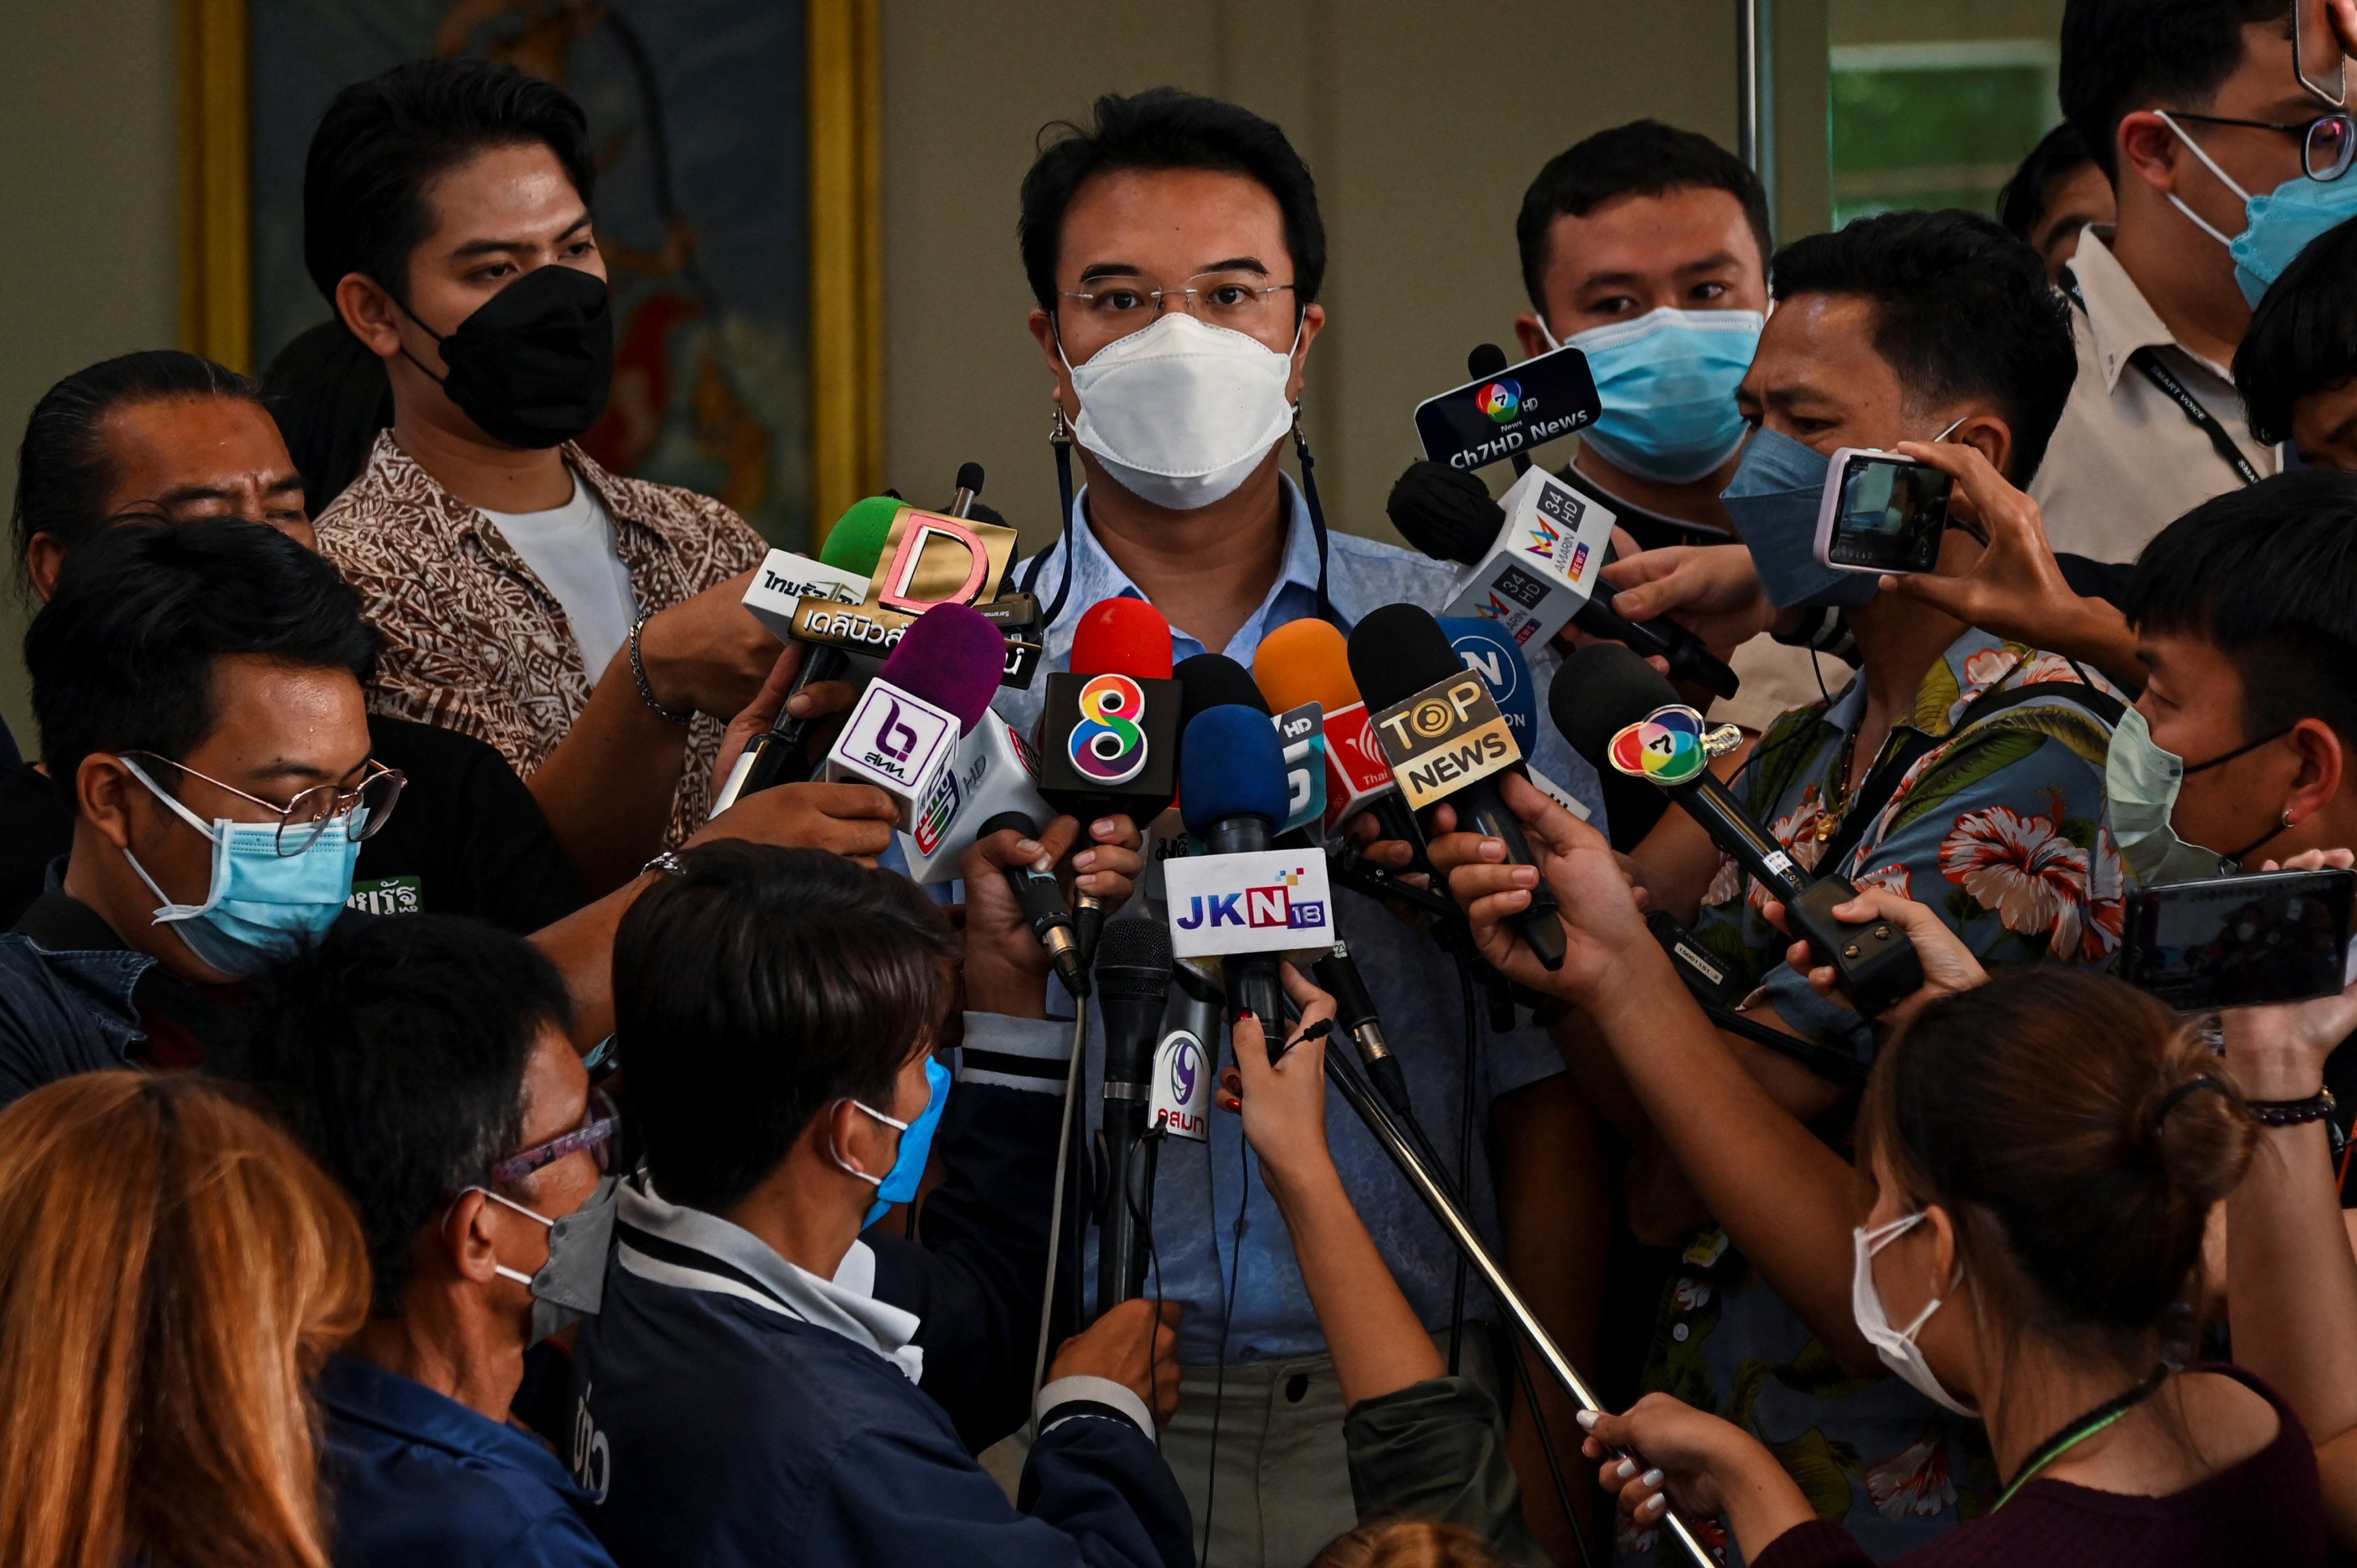 Prinn Panitchpakdi, a former deputy leader of Thailand’s Democrat party, faces allegations of sexual misconduct and rape. Photo: Thai New Pix Handout via Reuters